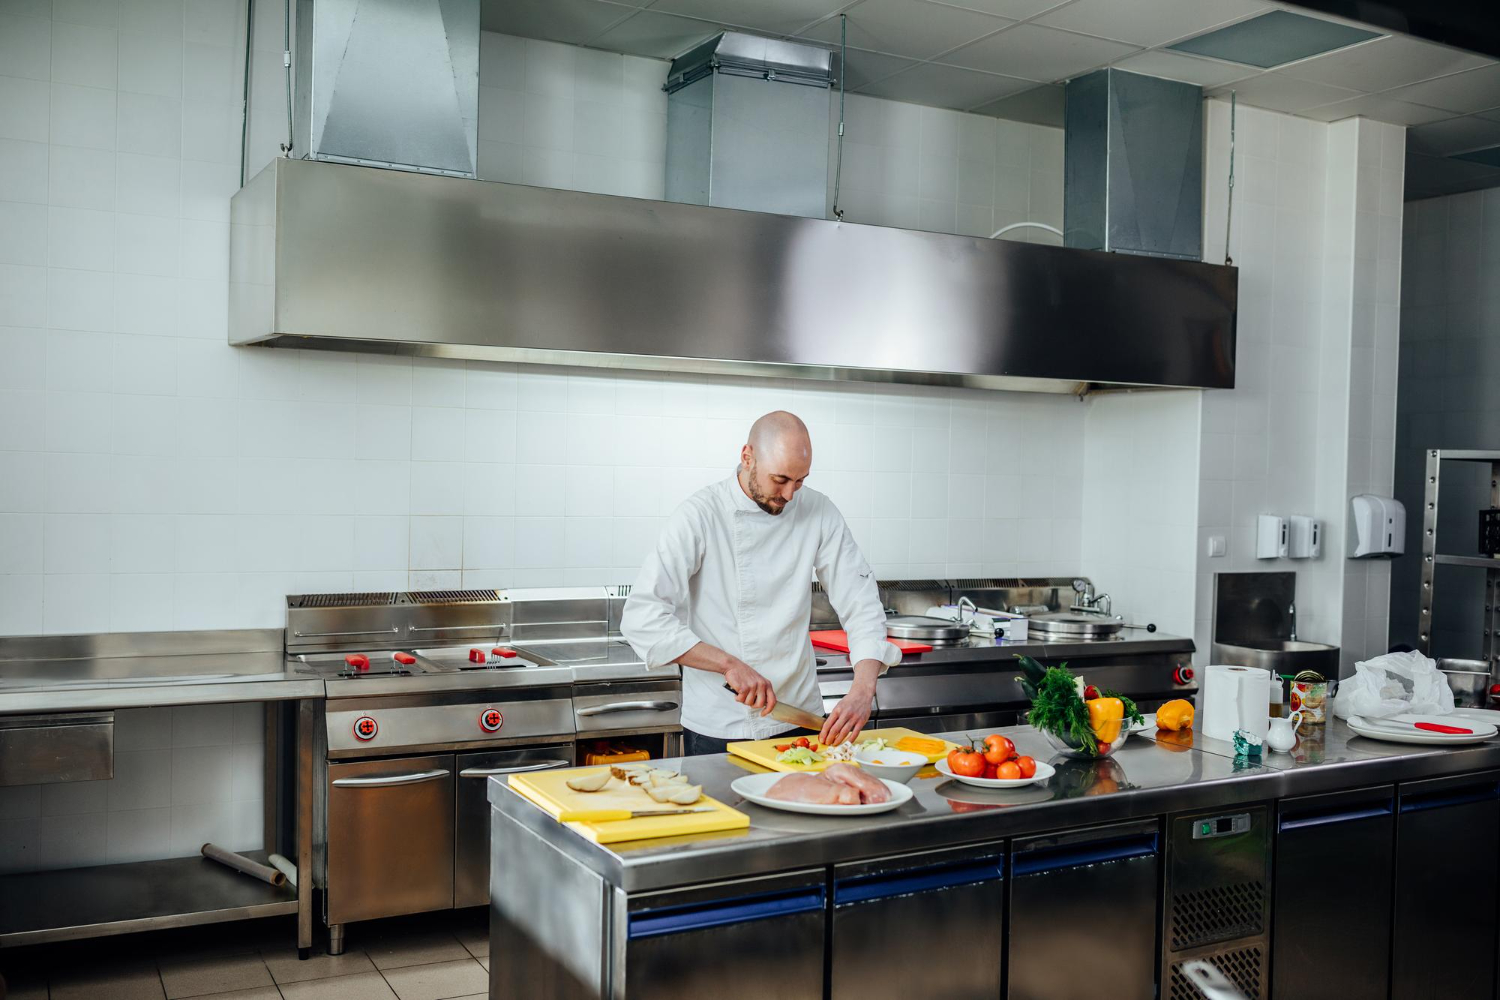 A chef works at a prep table in a commercial kitchen, slicing vegetables and preparing food on cutting boards. Behind the chef is a row of stainless steel fryers and industrial exhaust fans.